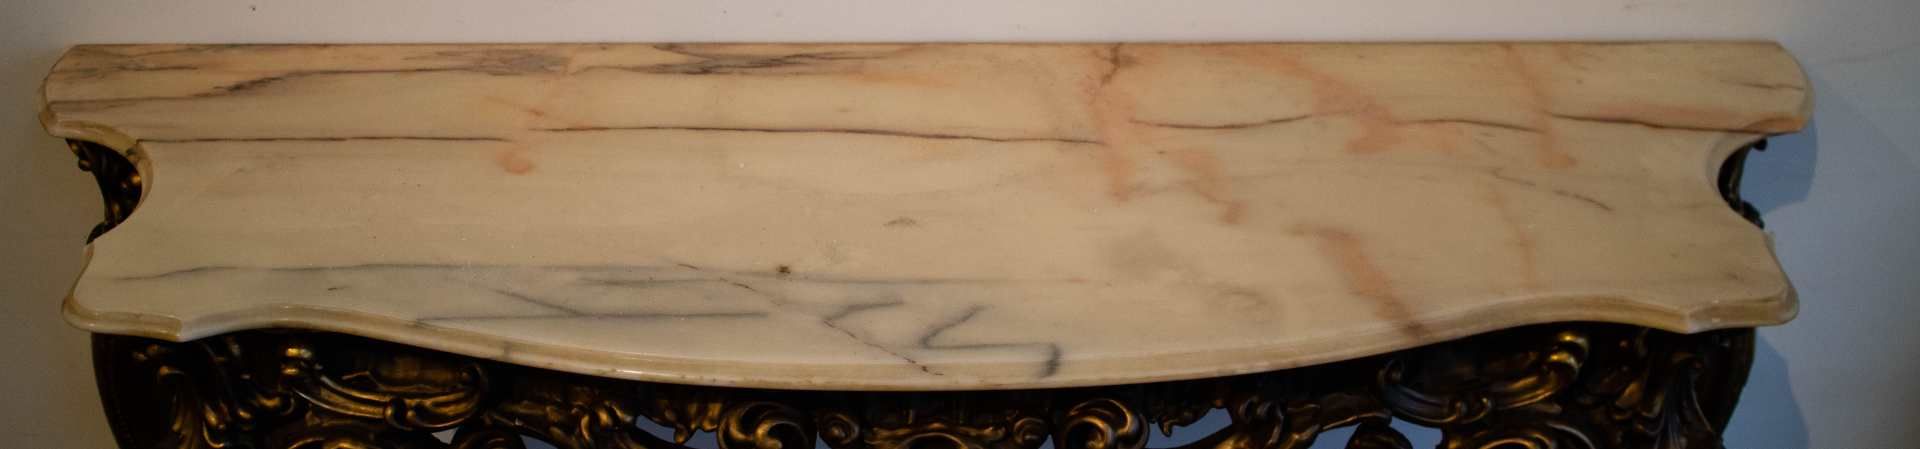 Console with marble top - Image 2 of 4